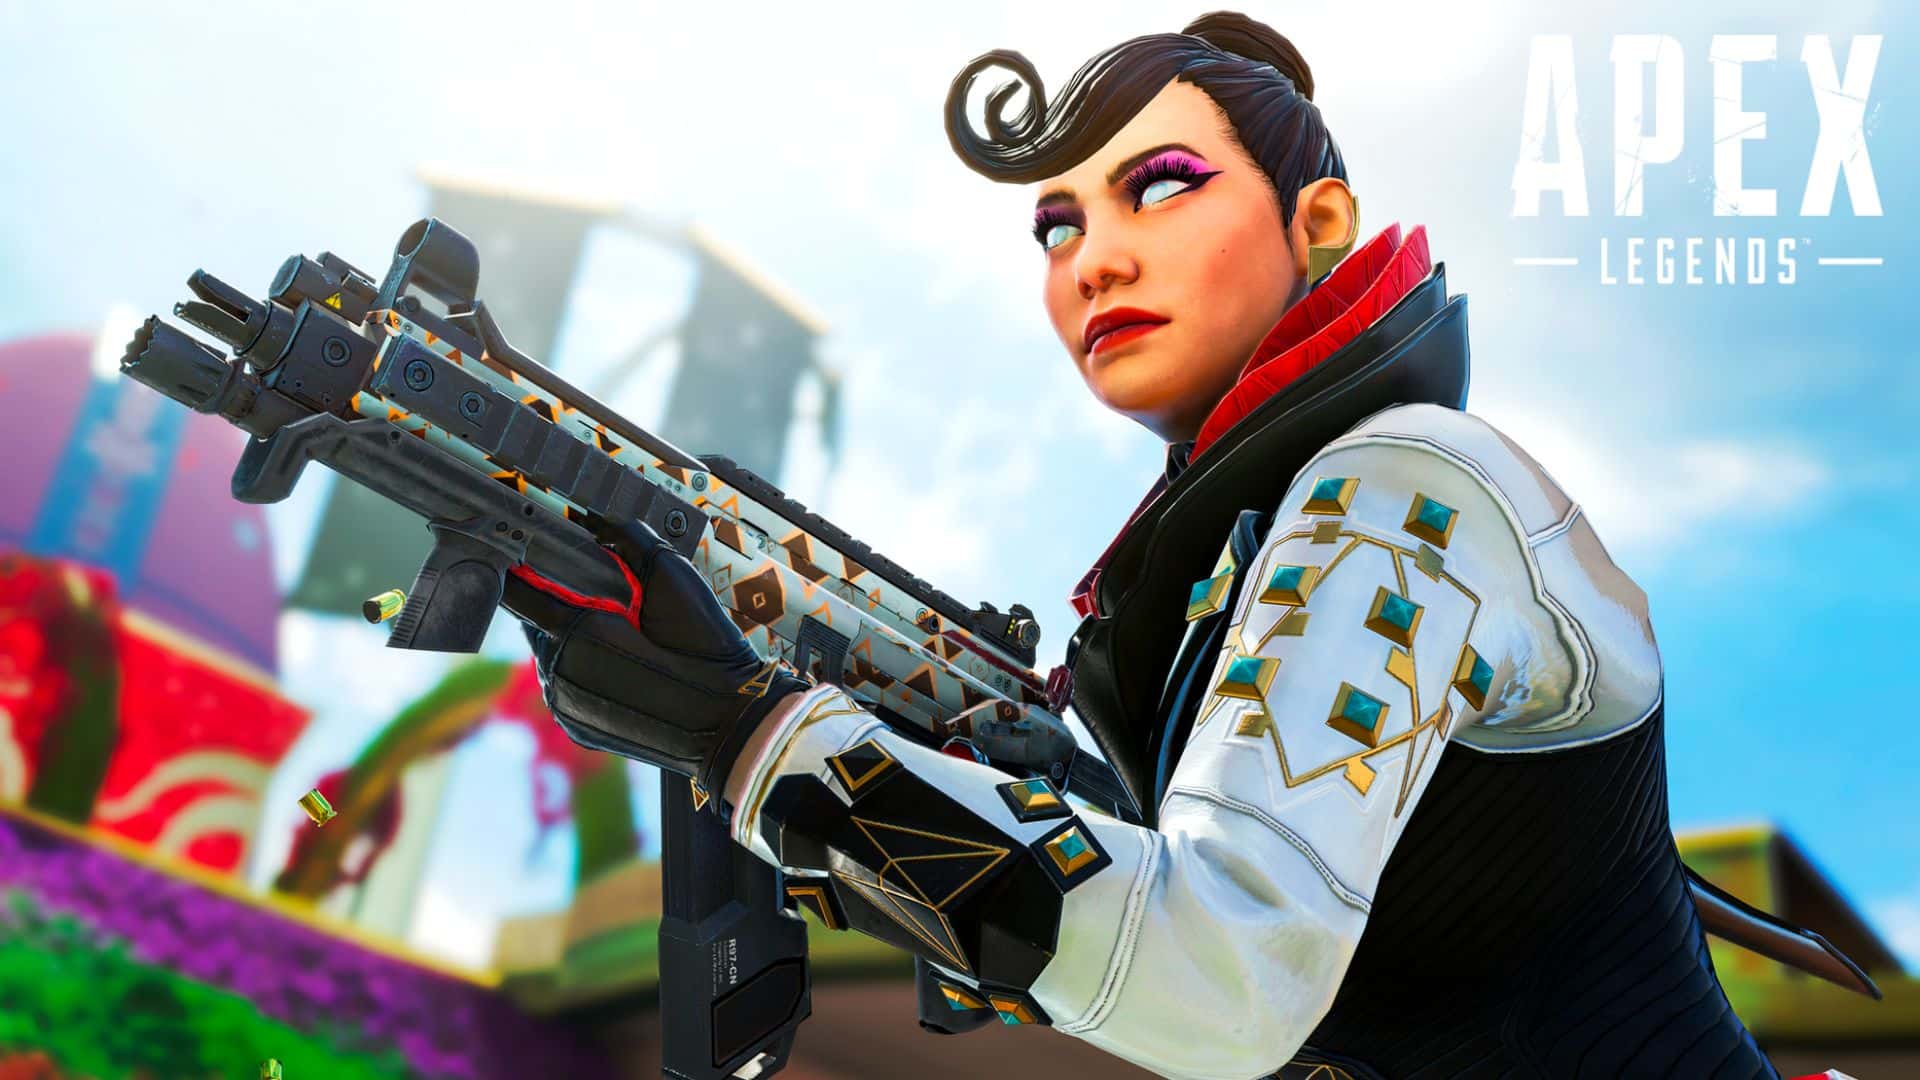 Wraith in Apex Legends with white and black skin